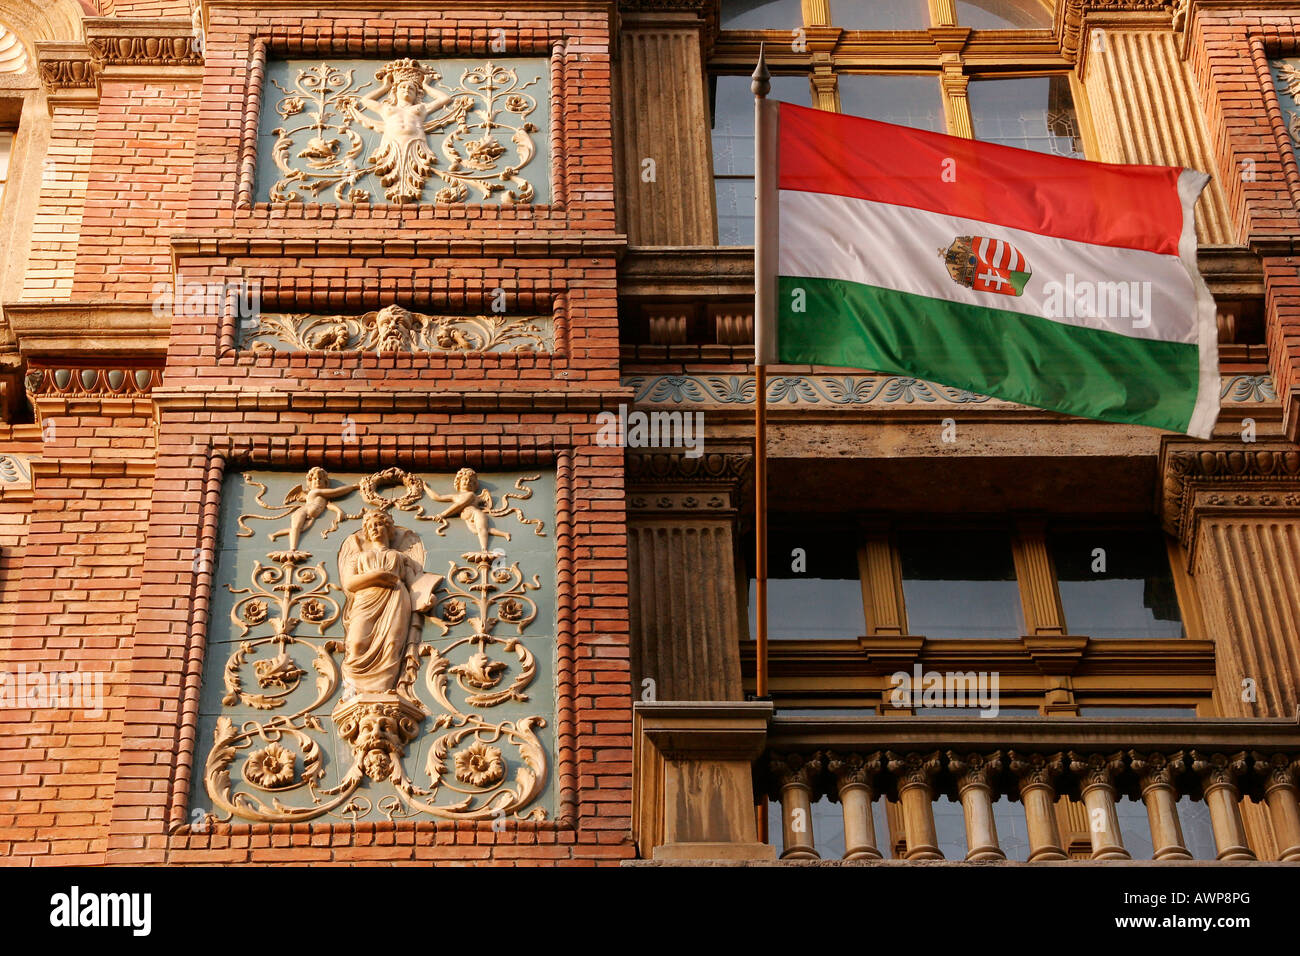 Flag of the Hungarian state on an elaborately decorated facade, Budapest, Hungary, Europe Stock Photo